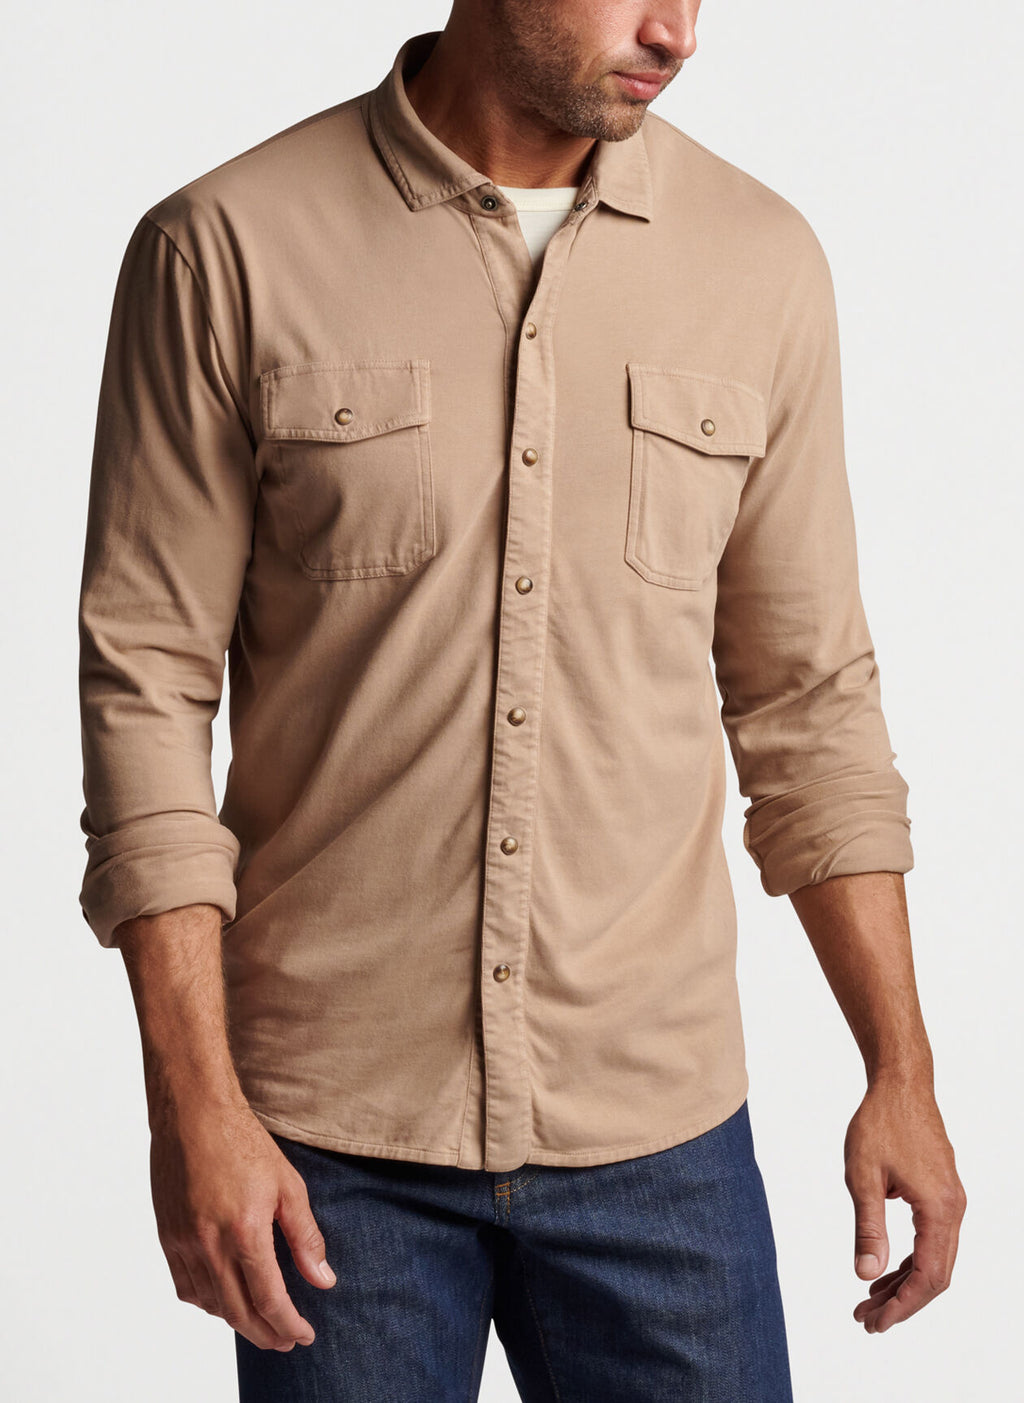 Lava Wash Jersey Shirt- Wicker - Island Outfitters